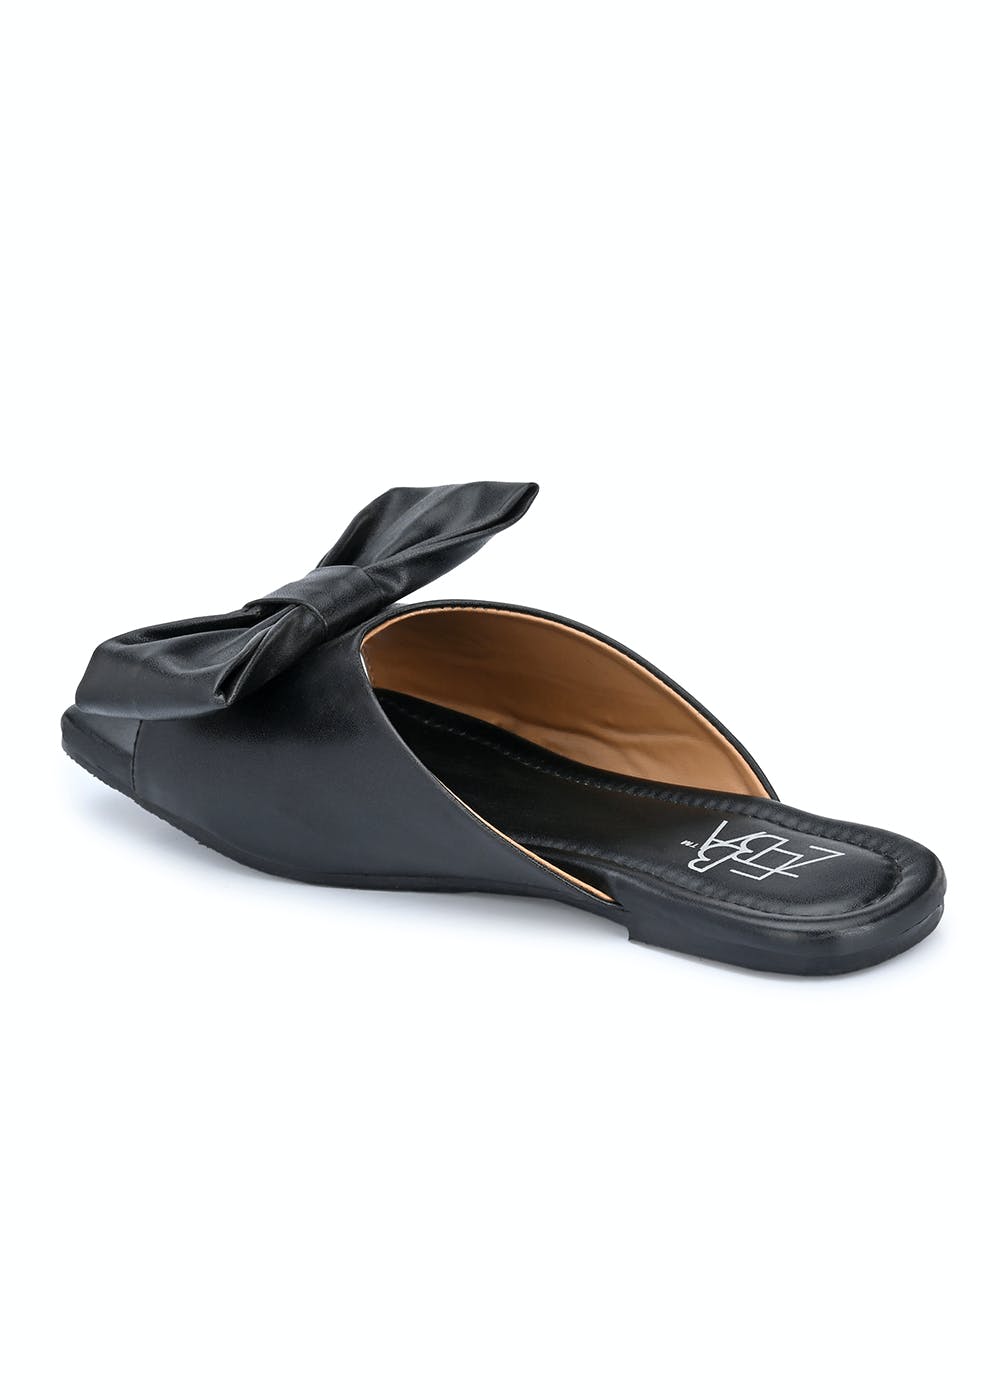 Eytys Leather Ava Mules in Black Womens Shoes Flats and flat shoes Slippers 